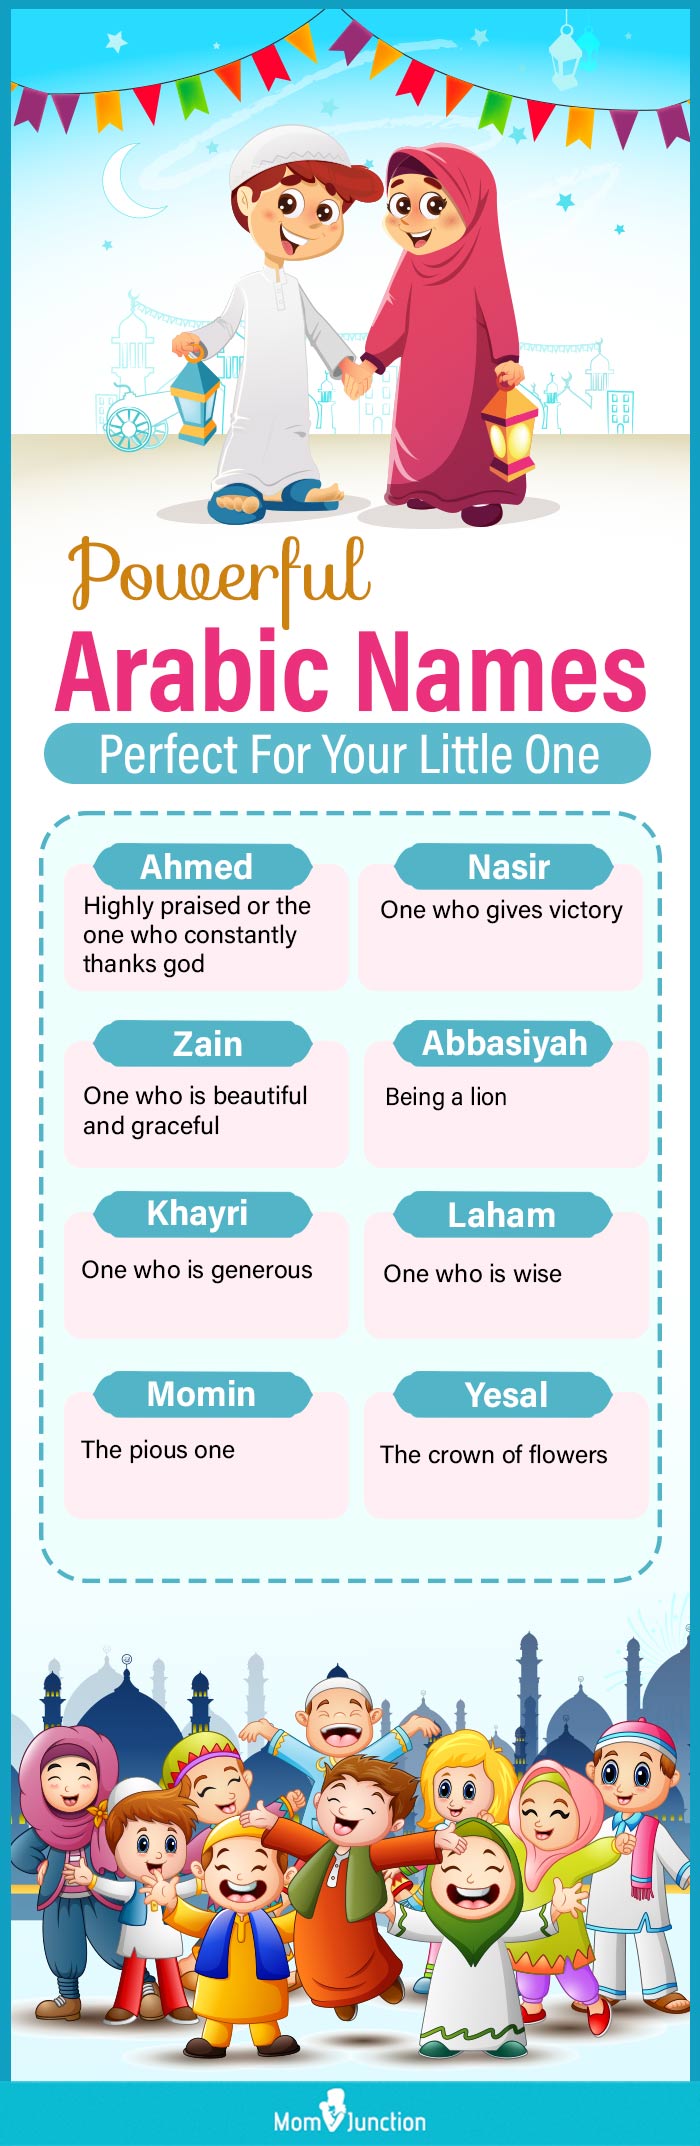 powerful arabic names perfect for your little one (infographic)